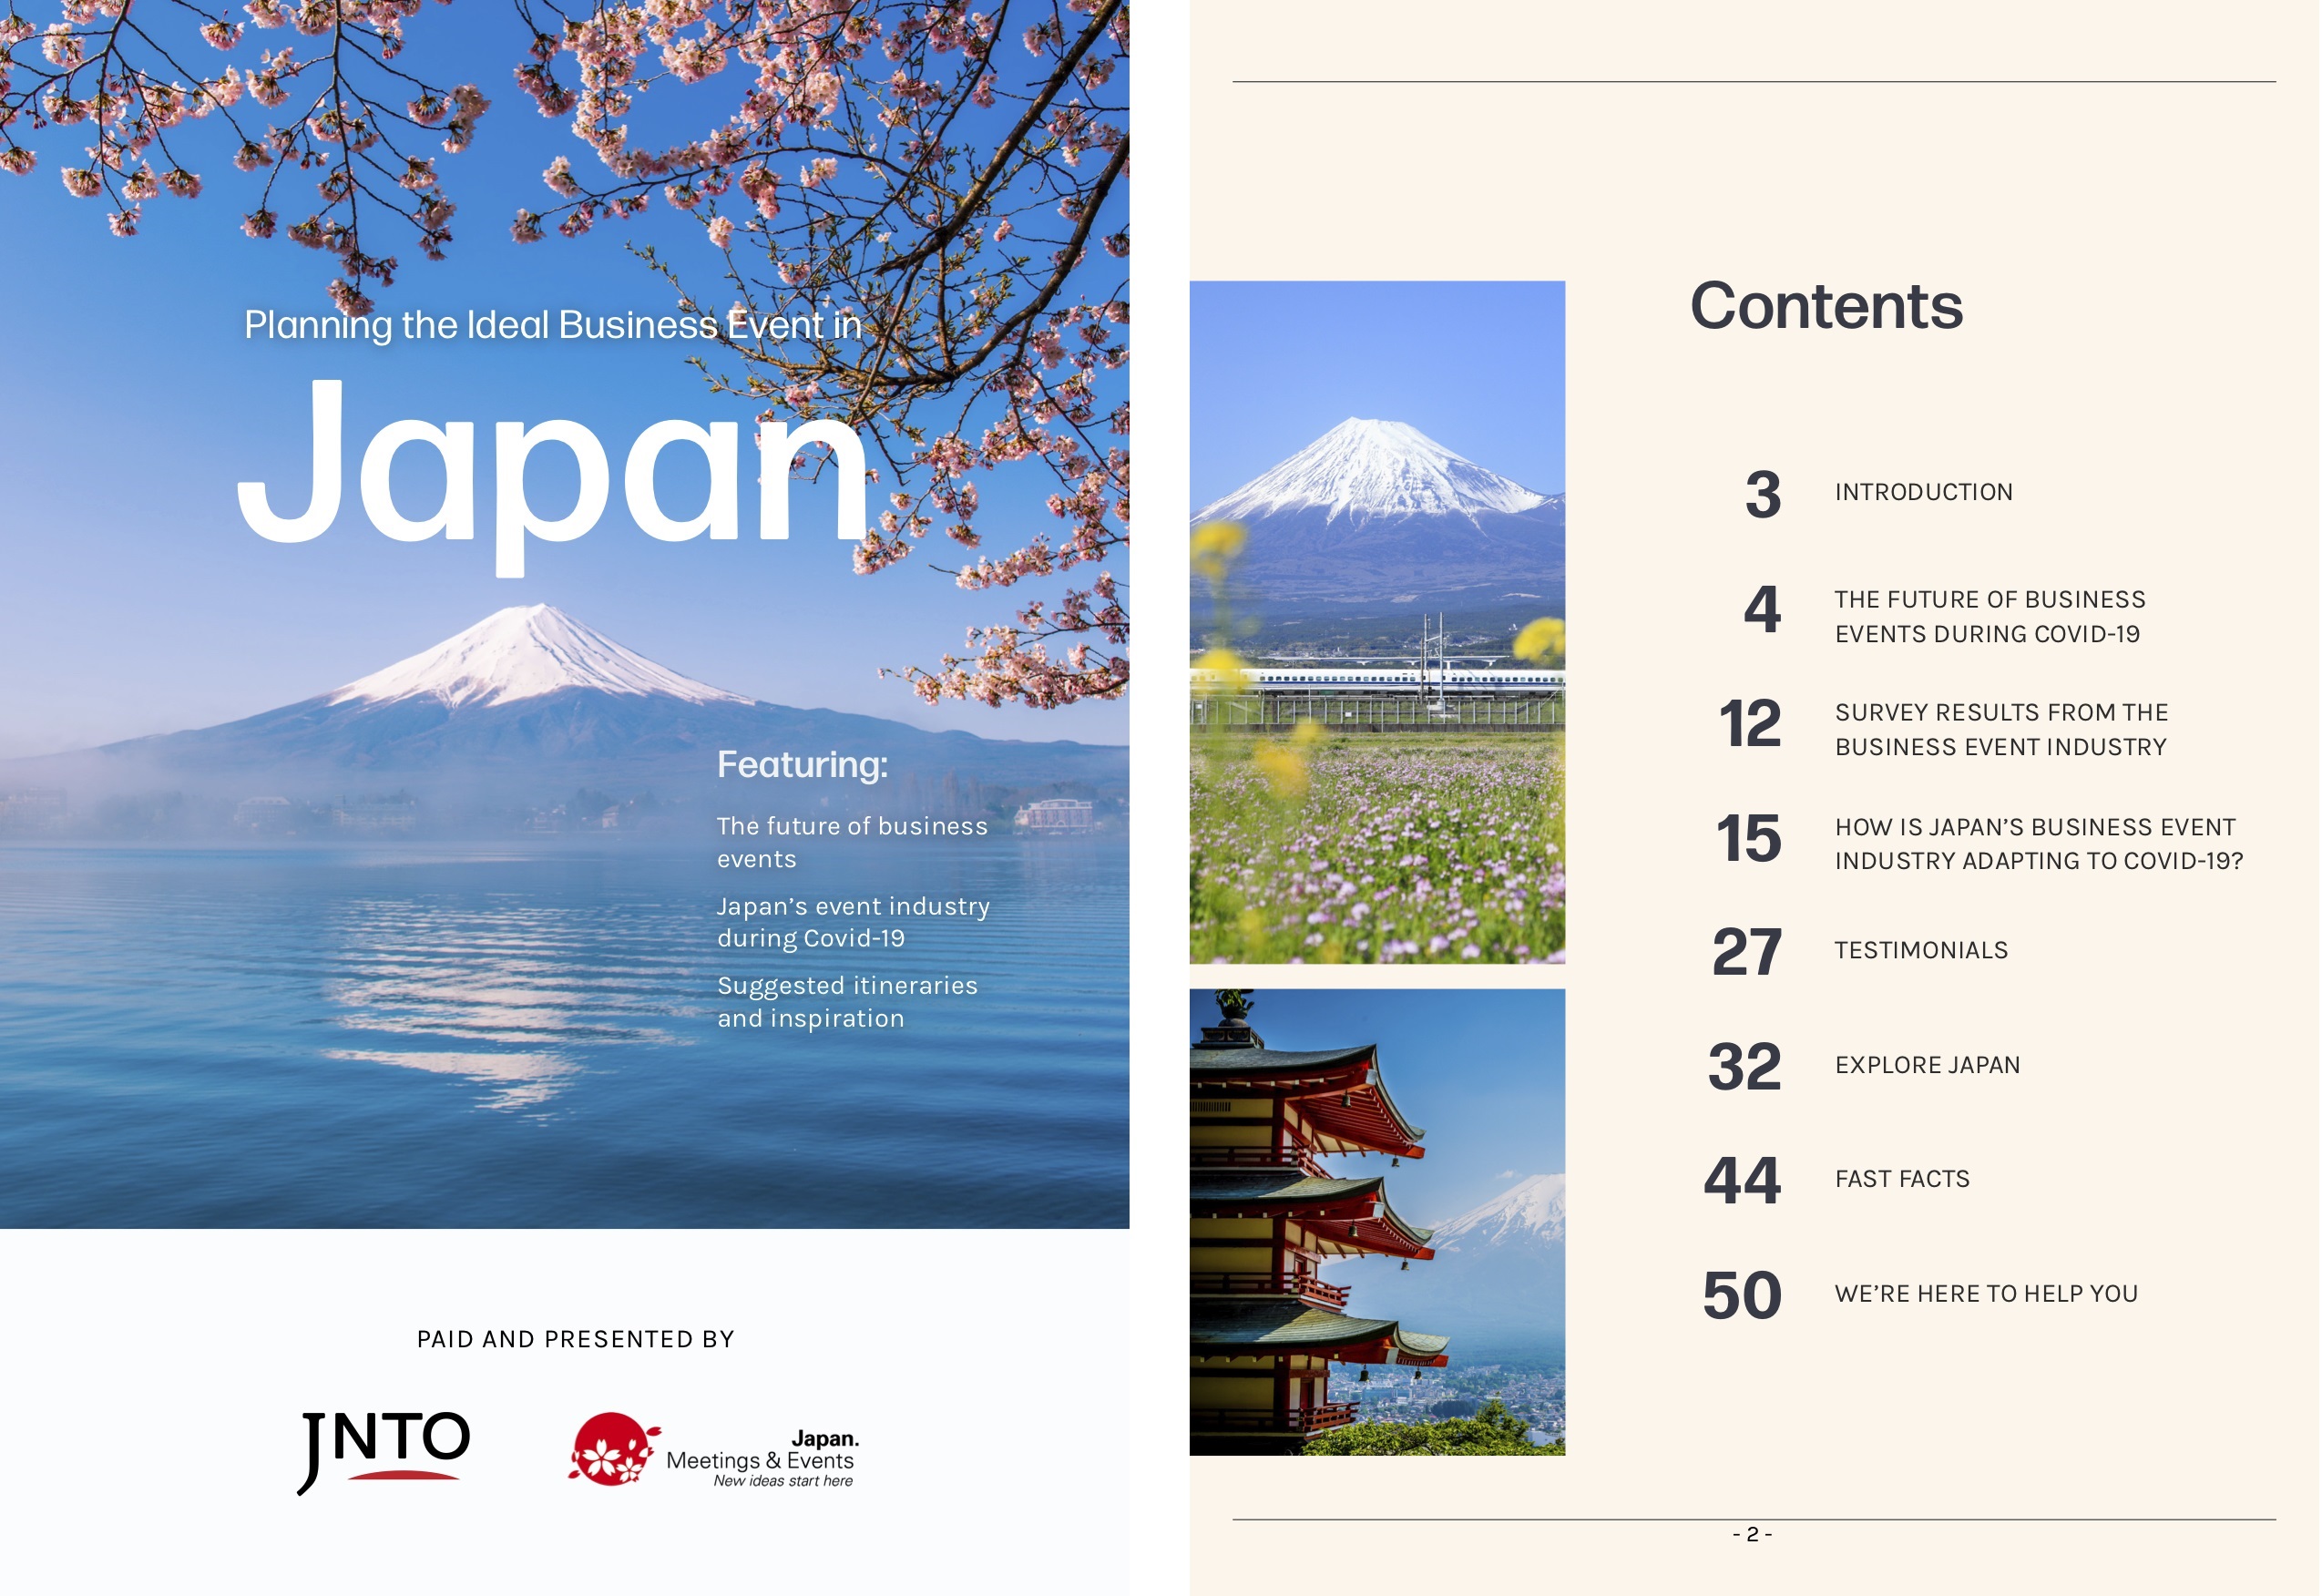 Planning the Ideal Business Event in Japan (PDF)